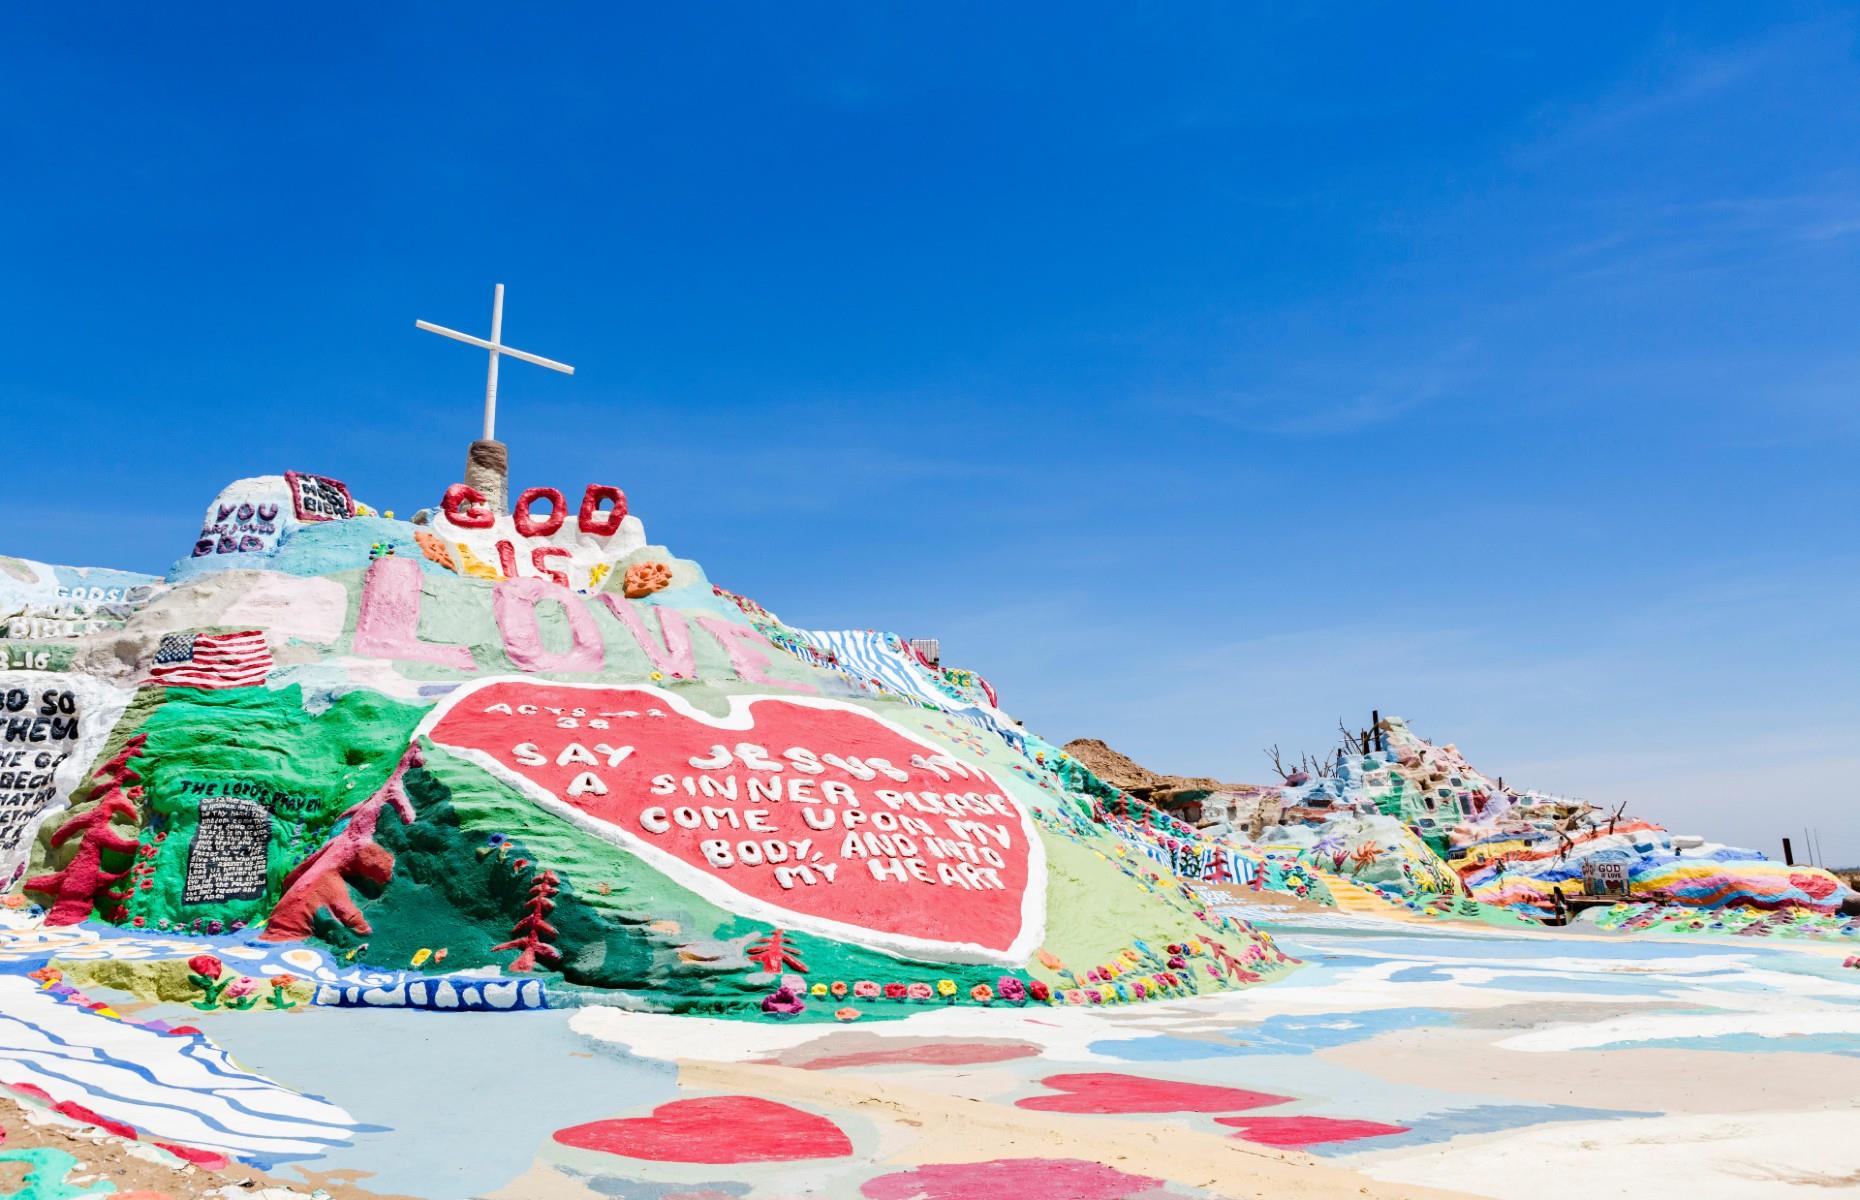 <p>Local adobe clay, straw, thousands of gallons of donated paint and a lot of love were poured into creating <a href="https://www.salvationmountain.us/">Salvation Mountain</a>, a vivid hillside monument in California’s Colorado Desert, near Calipatria in southern California. It was created by local artist Leonard Knight, who began piecing it together in 1985 as a symbol of his religious devotion. He regularly updated it with messages and embellishments up until his death in 2014.</p>